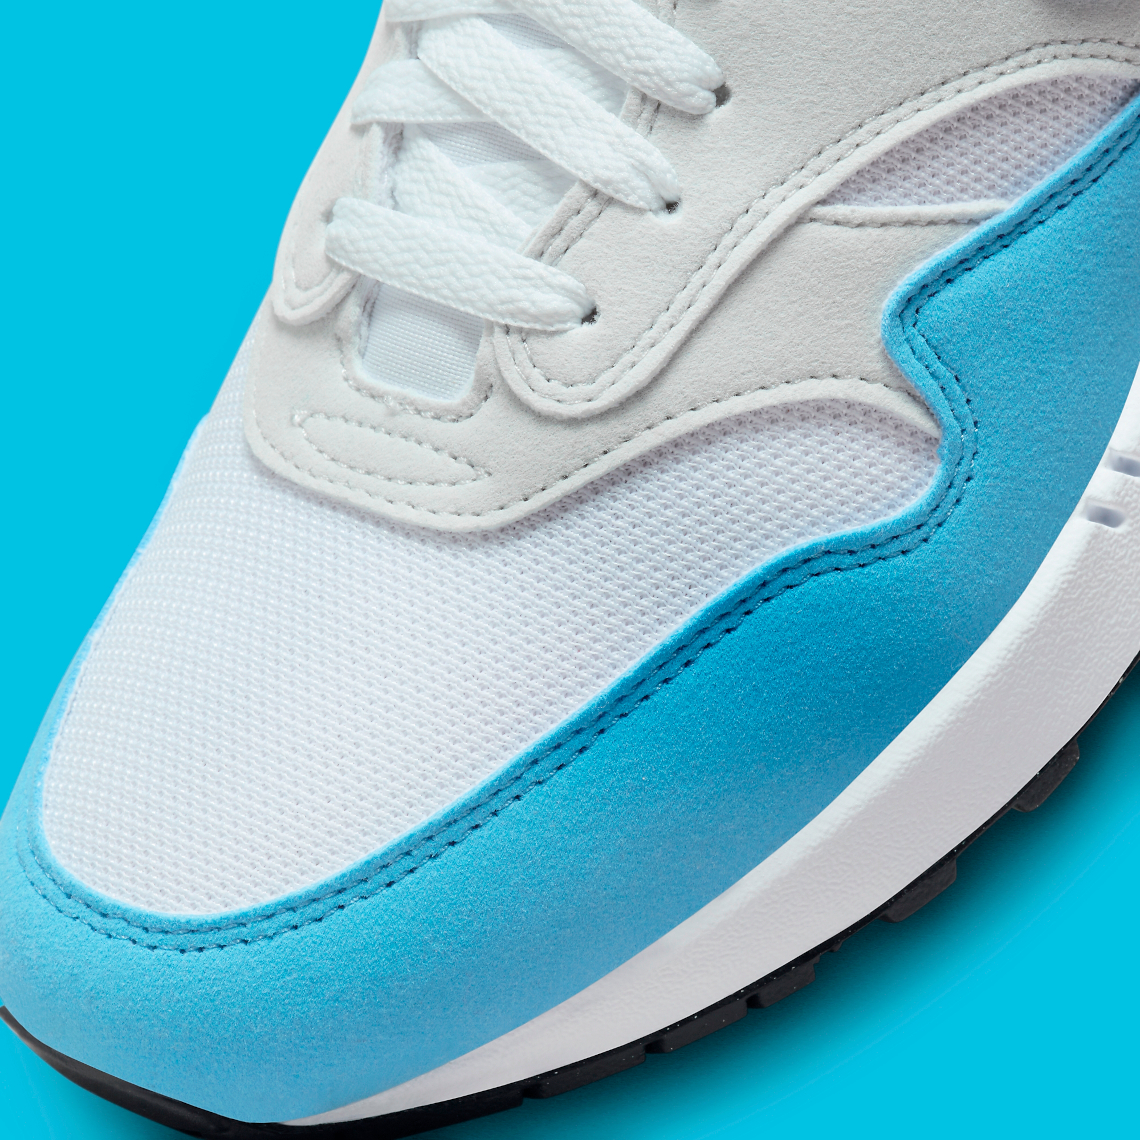 The Nike Air Max 1 University Blue Releases November 23